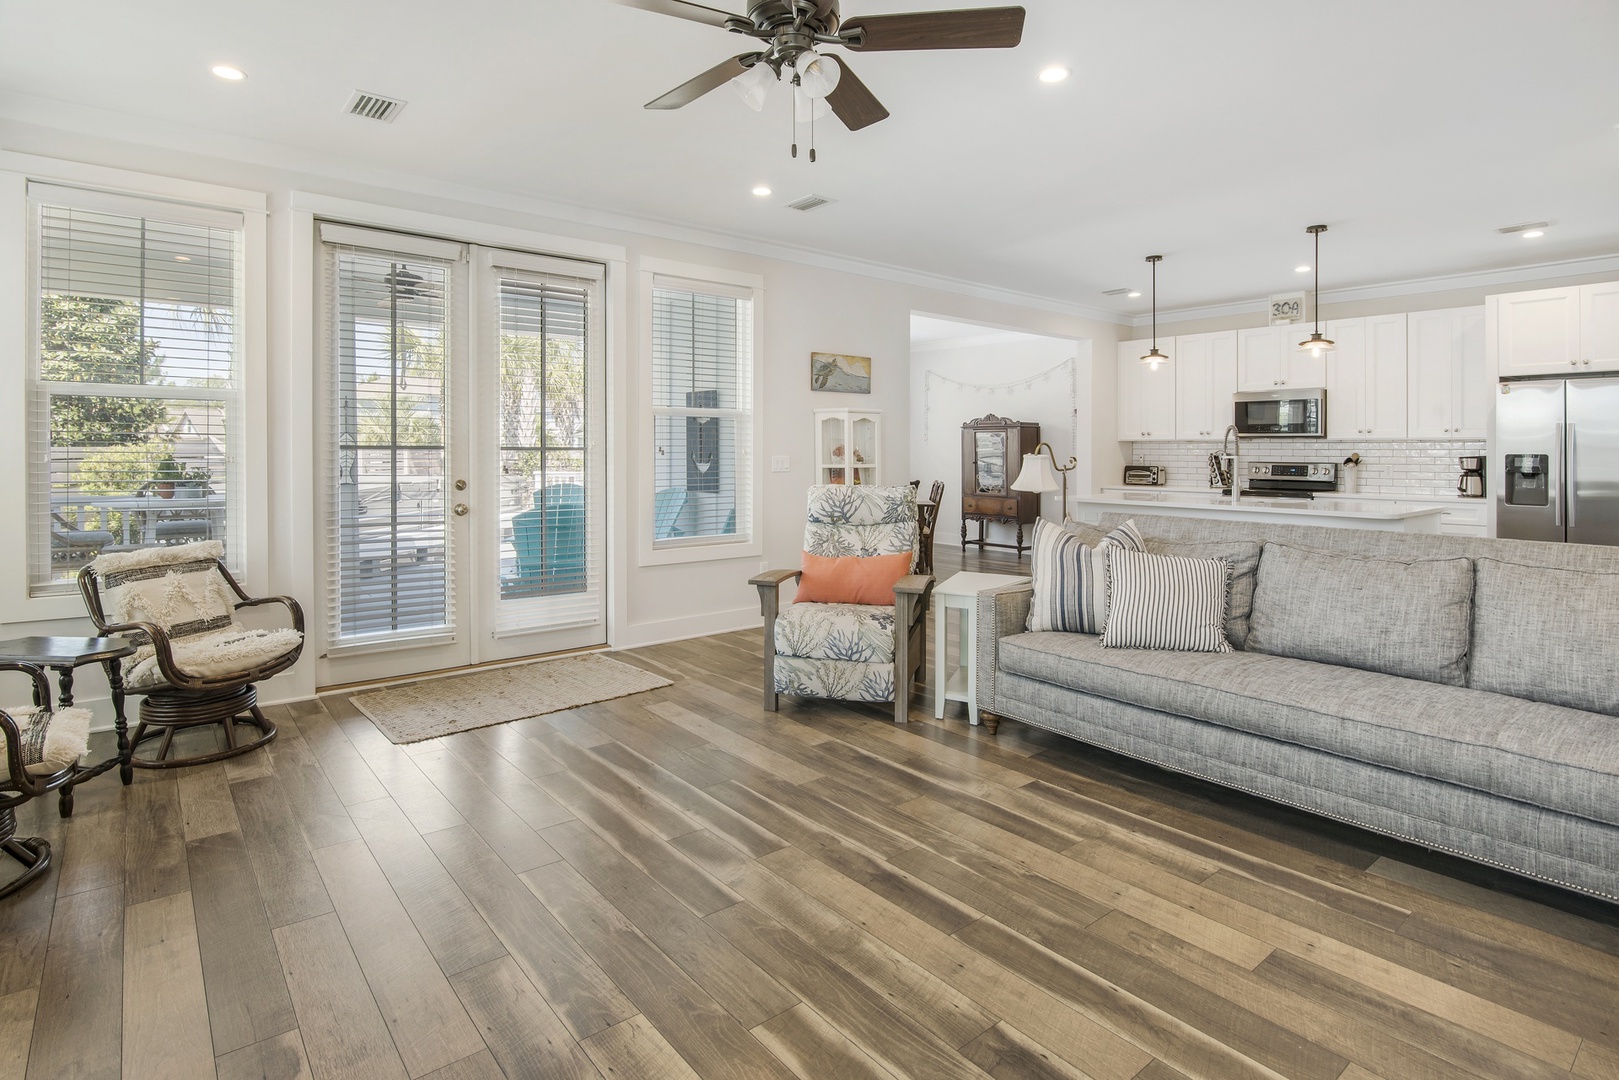 You'll love the open floor plan for family gatherings!